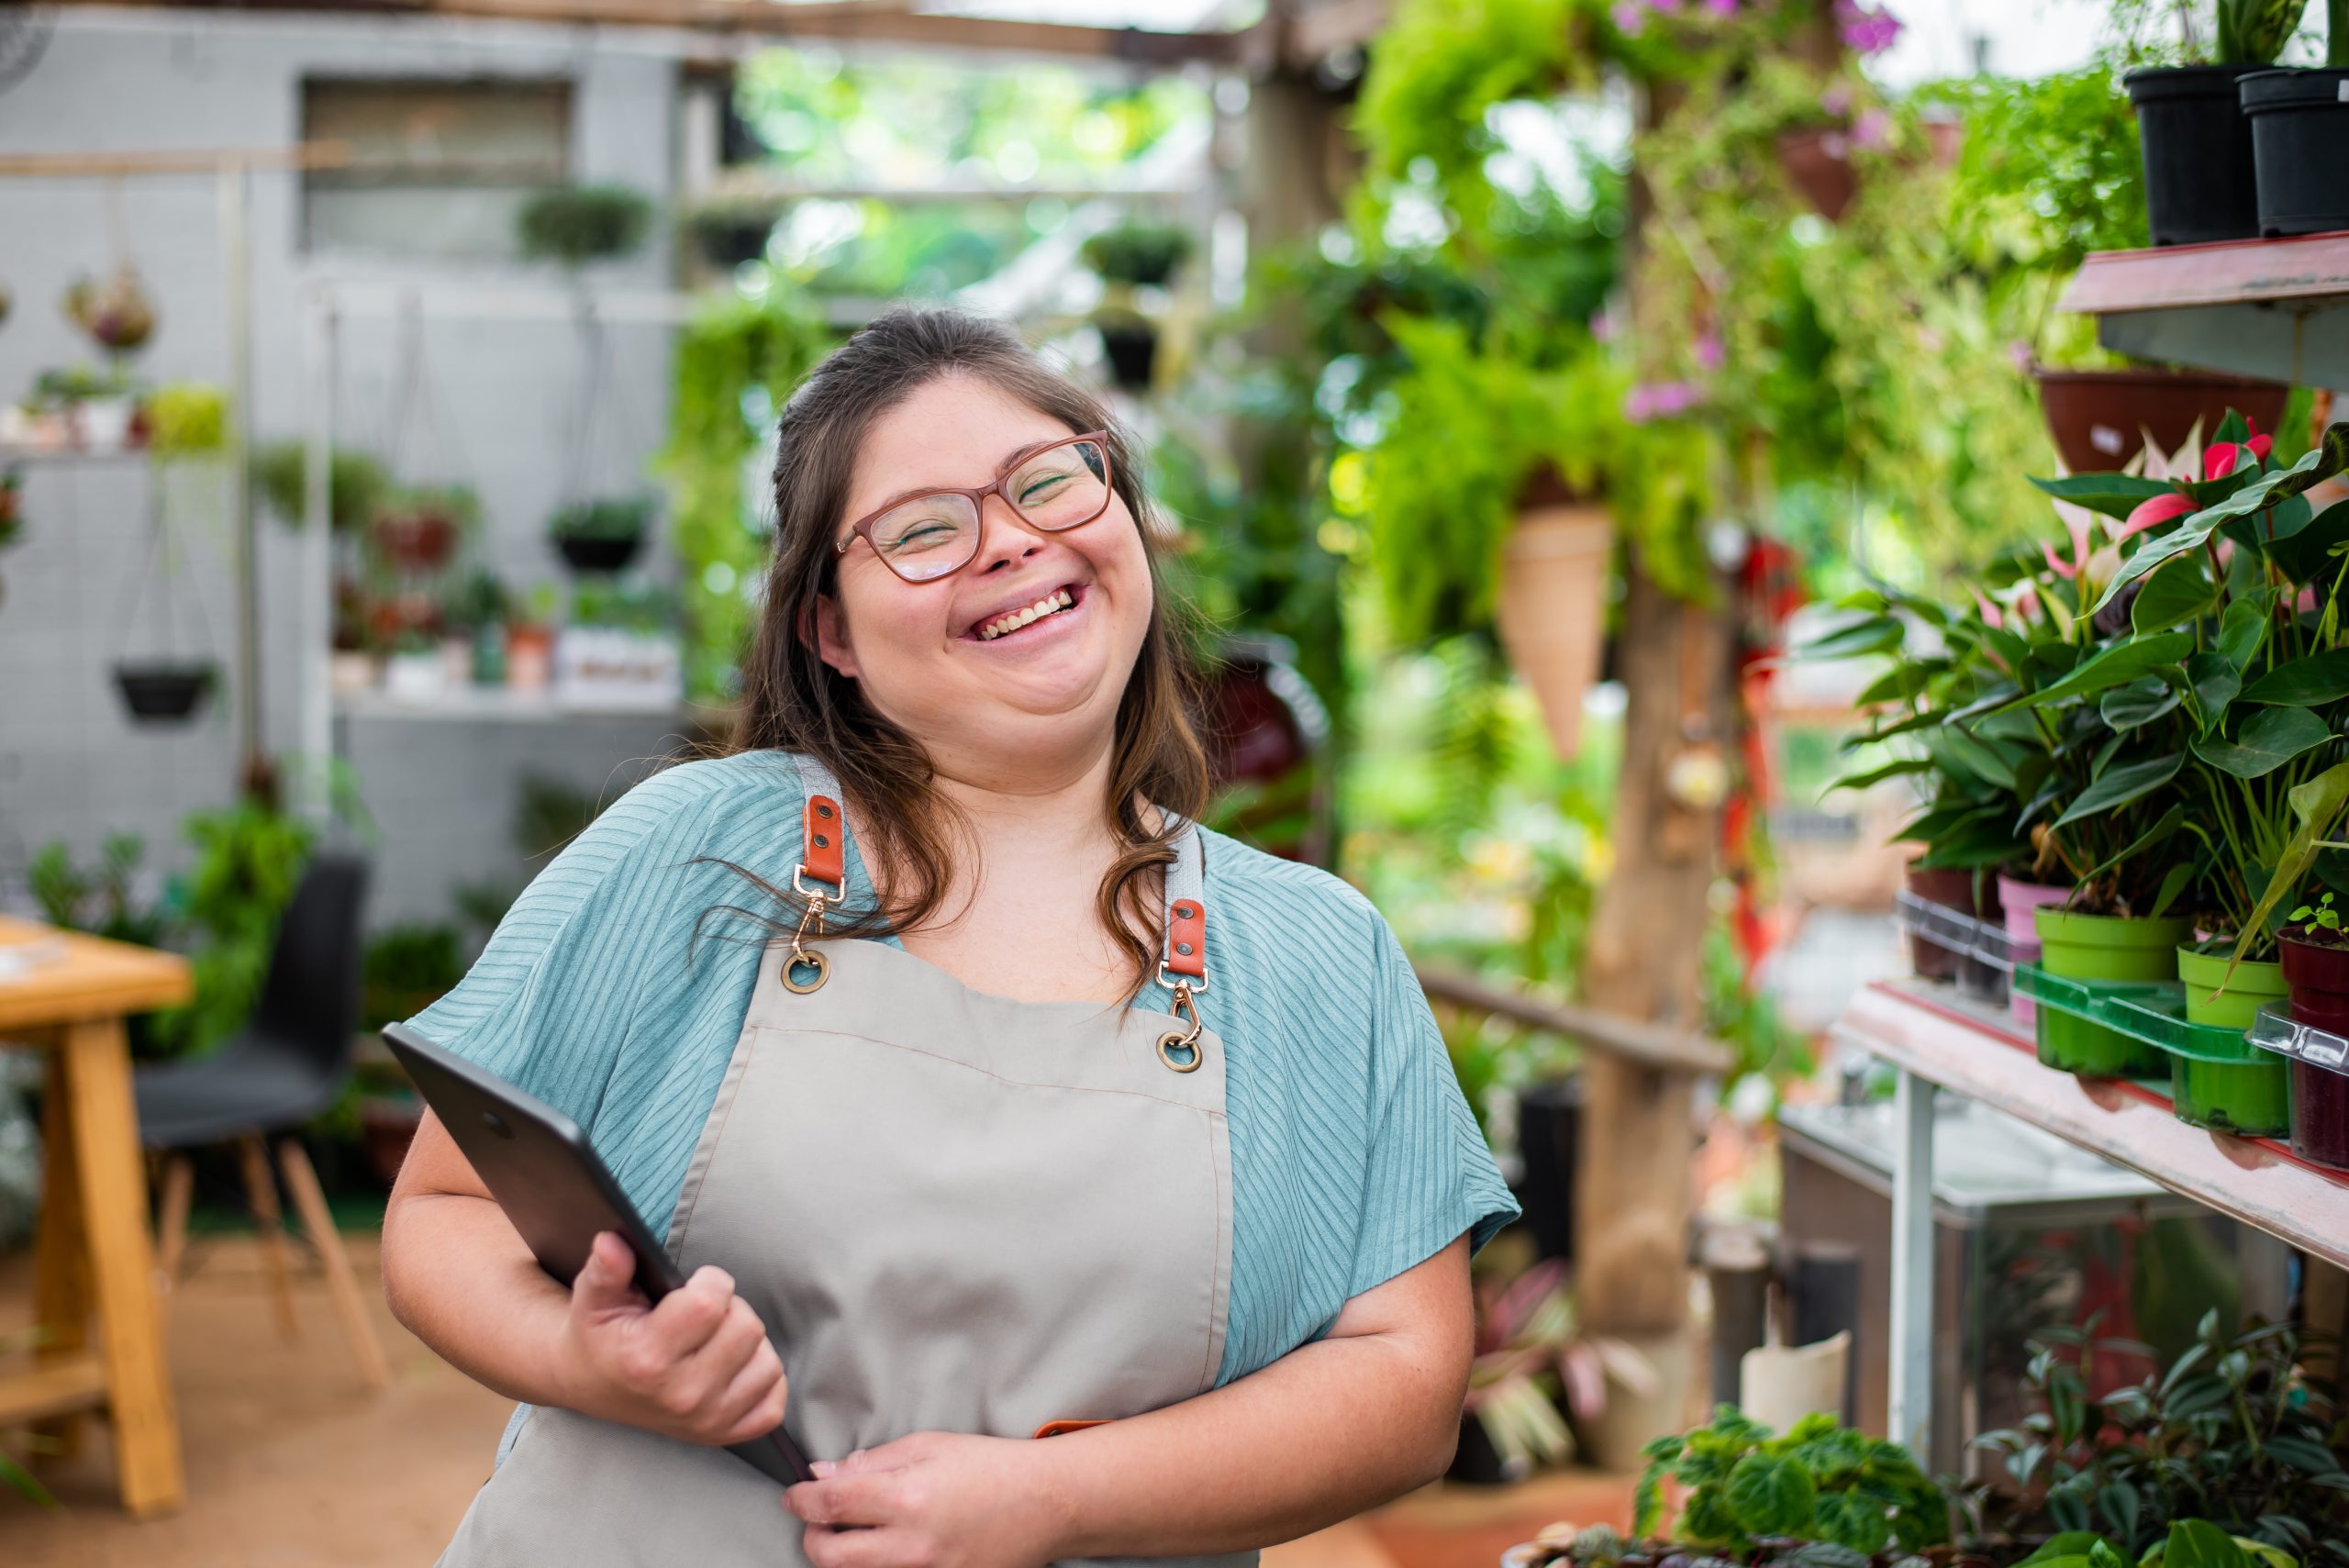 image: a woman with obvious disabilities with light skin and dark hair wearing an apron, holding a tablet in a garden shop setting smiling at the camera